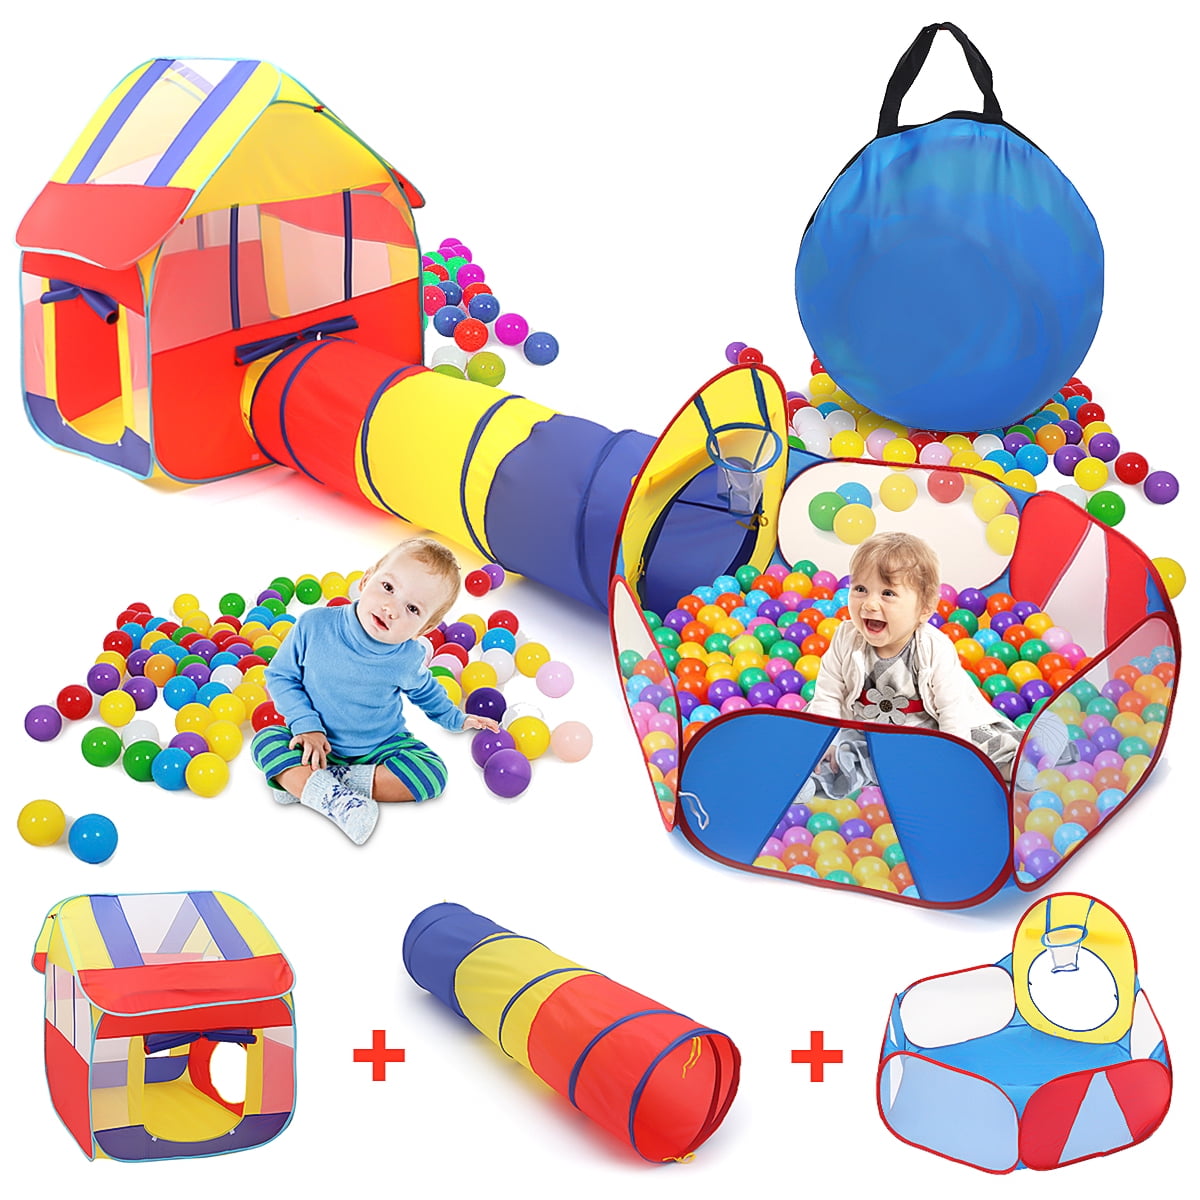 5pc Playhouse Jungle Gym Pop Up Tents Tunnels & Basketball Pit Boys/Girls Babies 